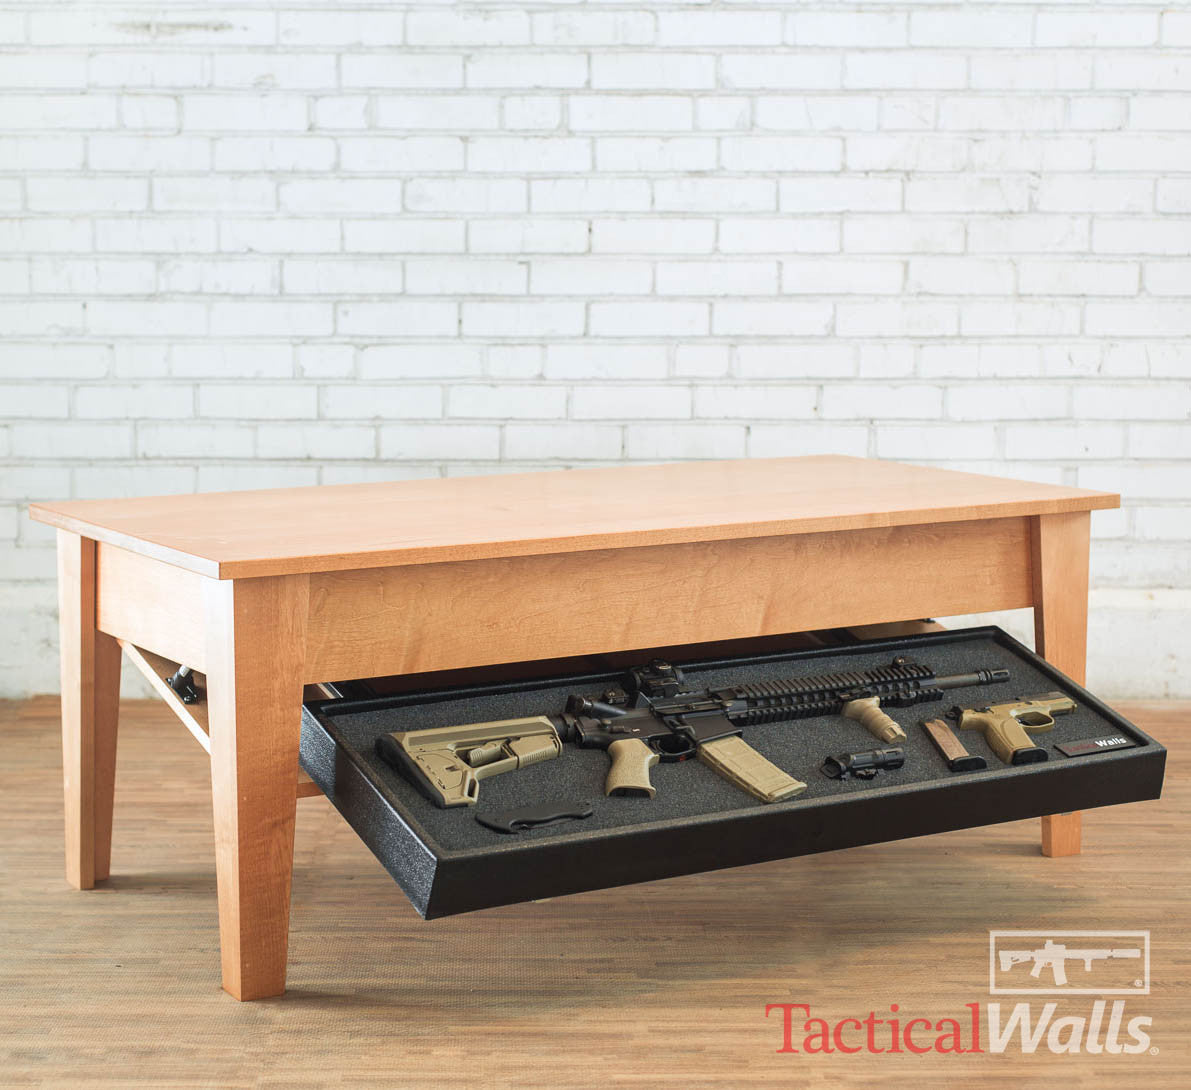 Index Php Tactical Walls Coffee Table